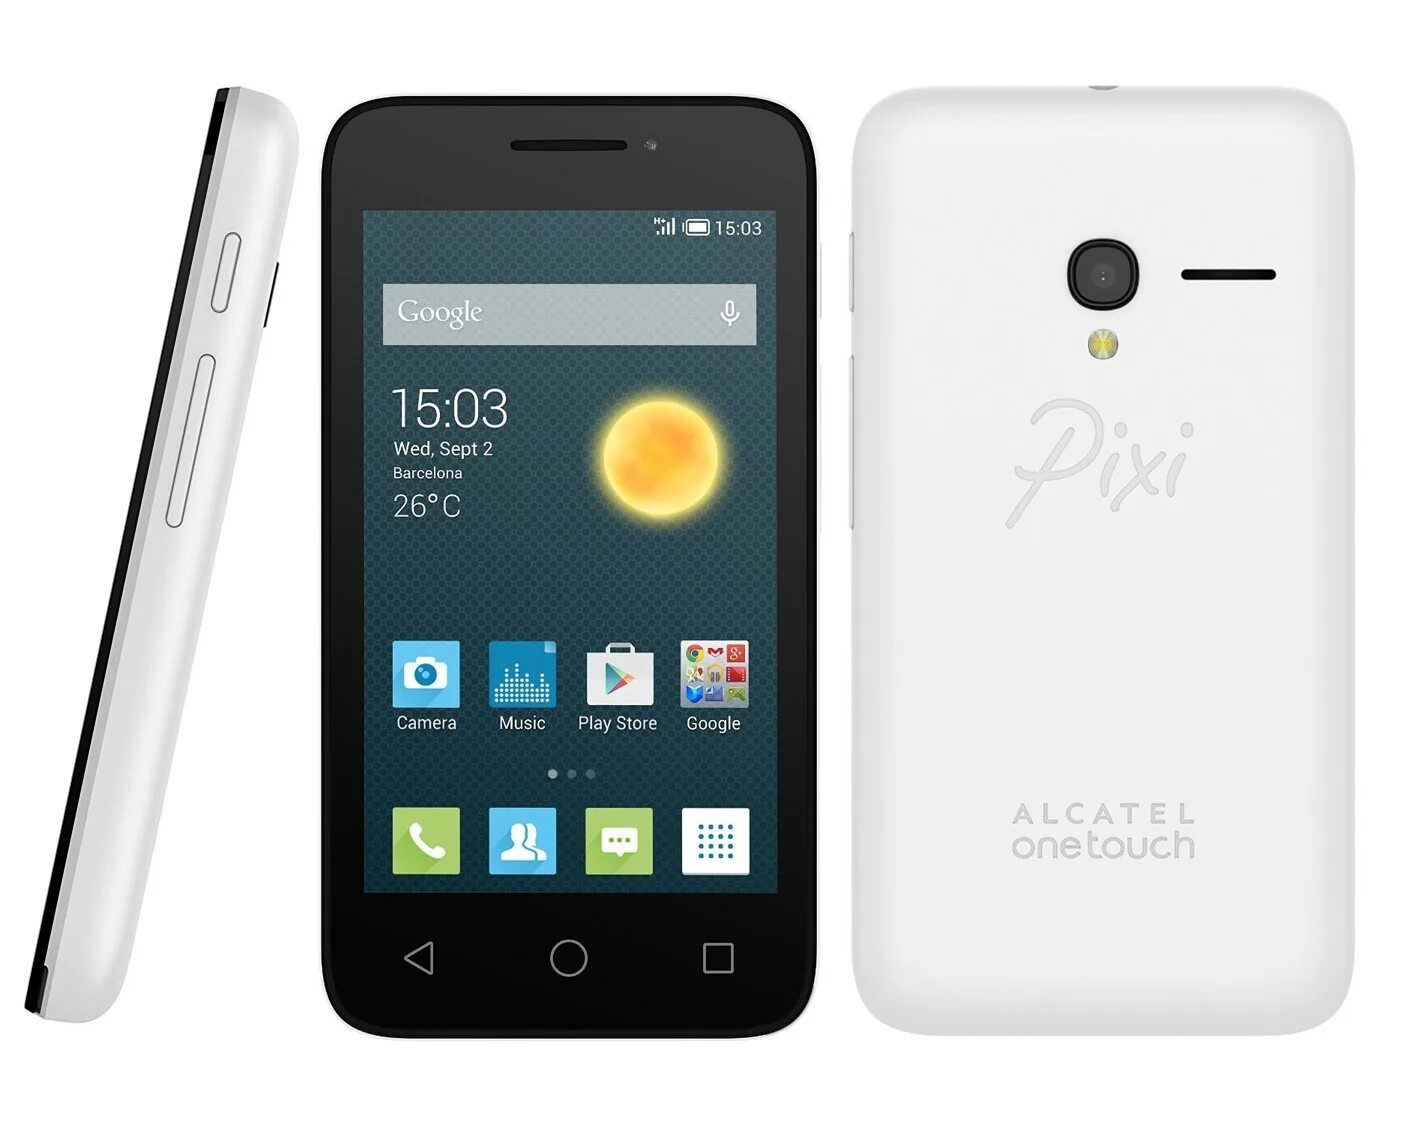 Alcatel one touch 3. Alcatel one Touch Pixi 3. Алкатель one Touch Pixi 3 4. Алкатель one Touch Pixi 1. Alcatel one Touch Pixi 4.